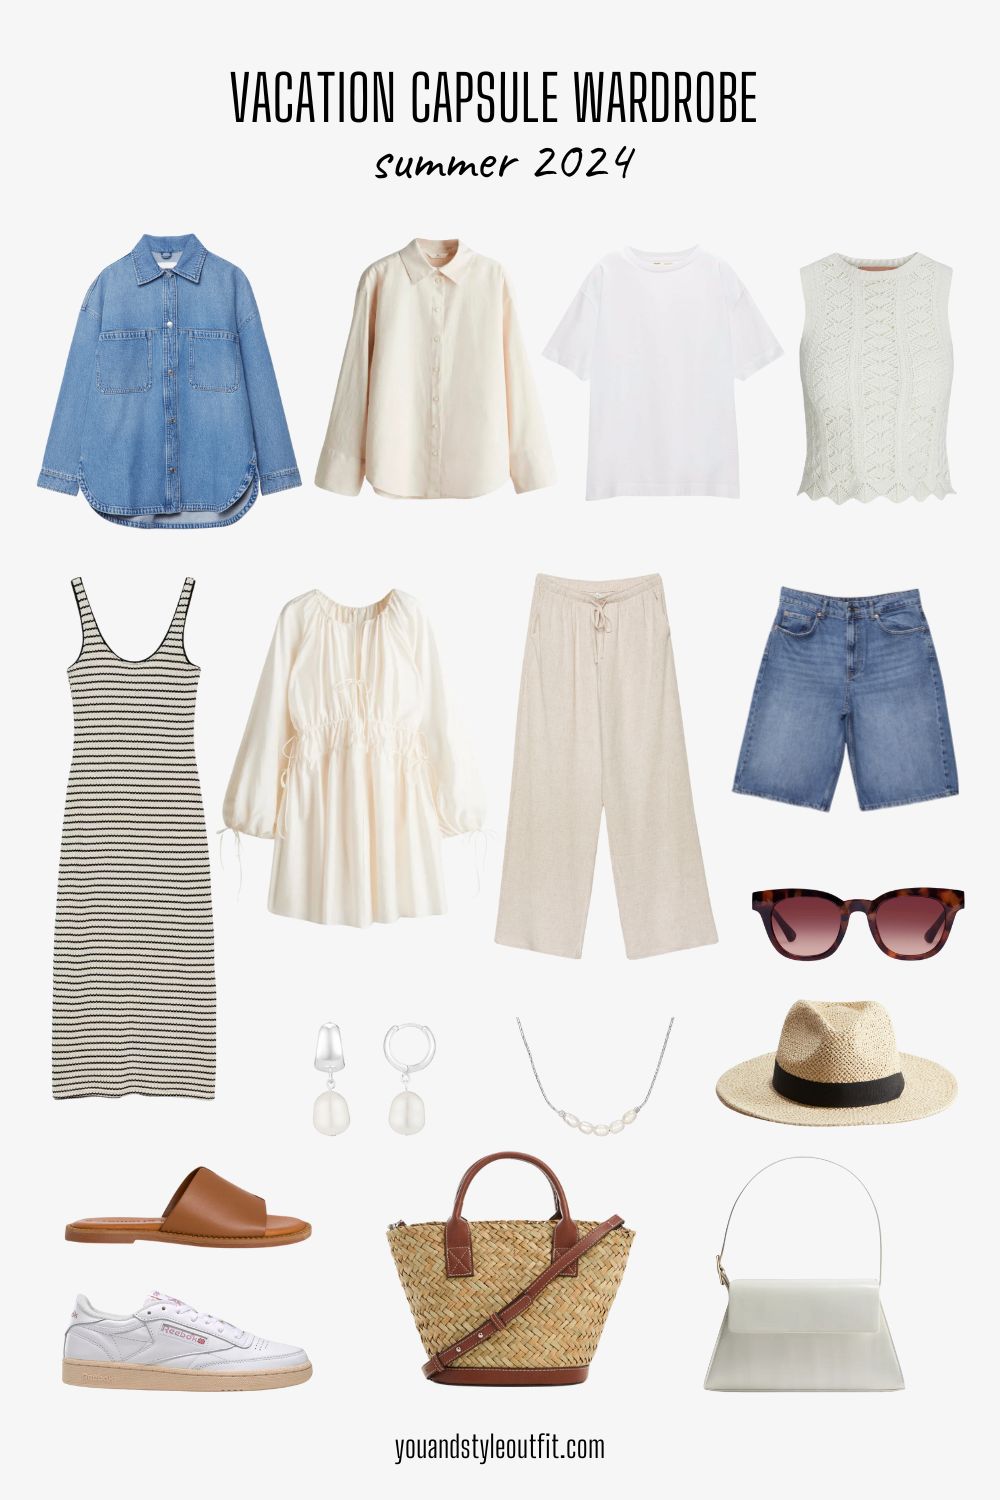 Vacation capsule wardrobe for Summer 2024